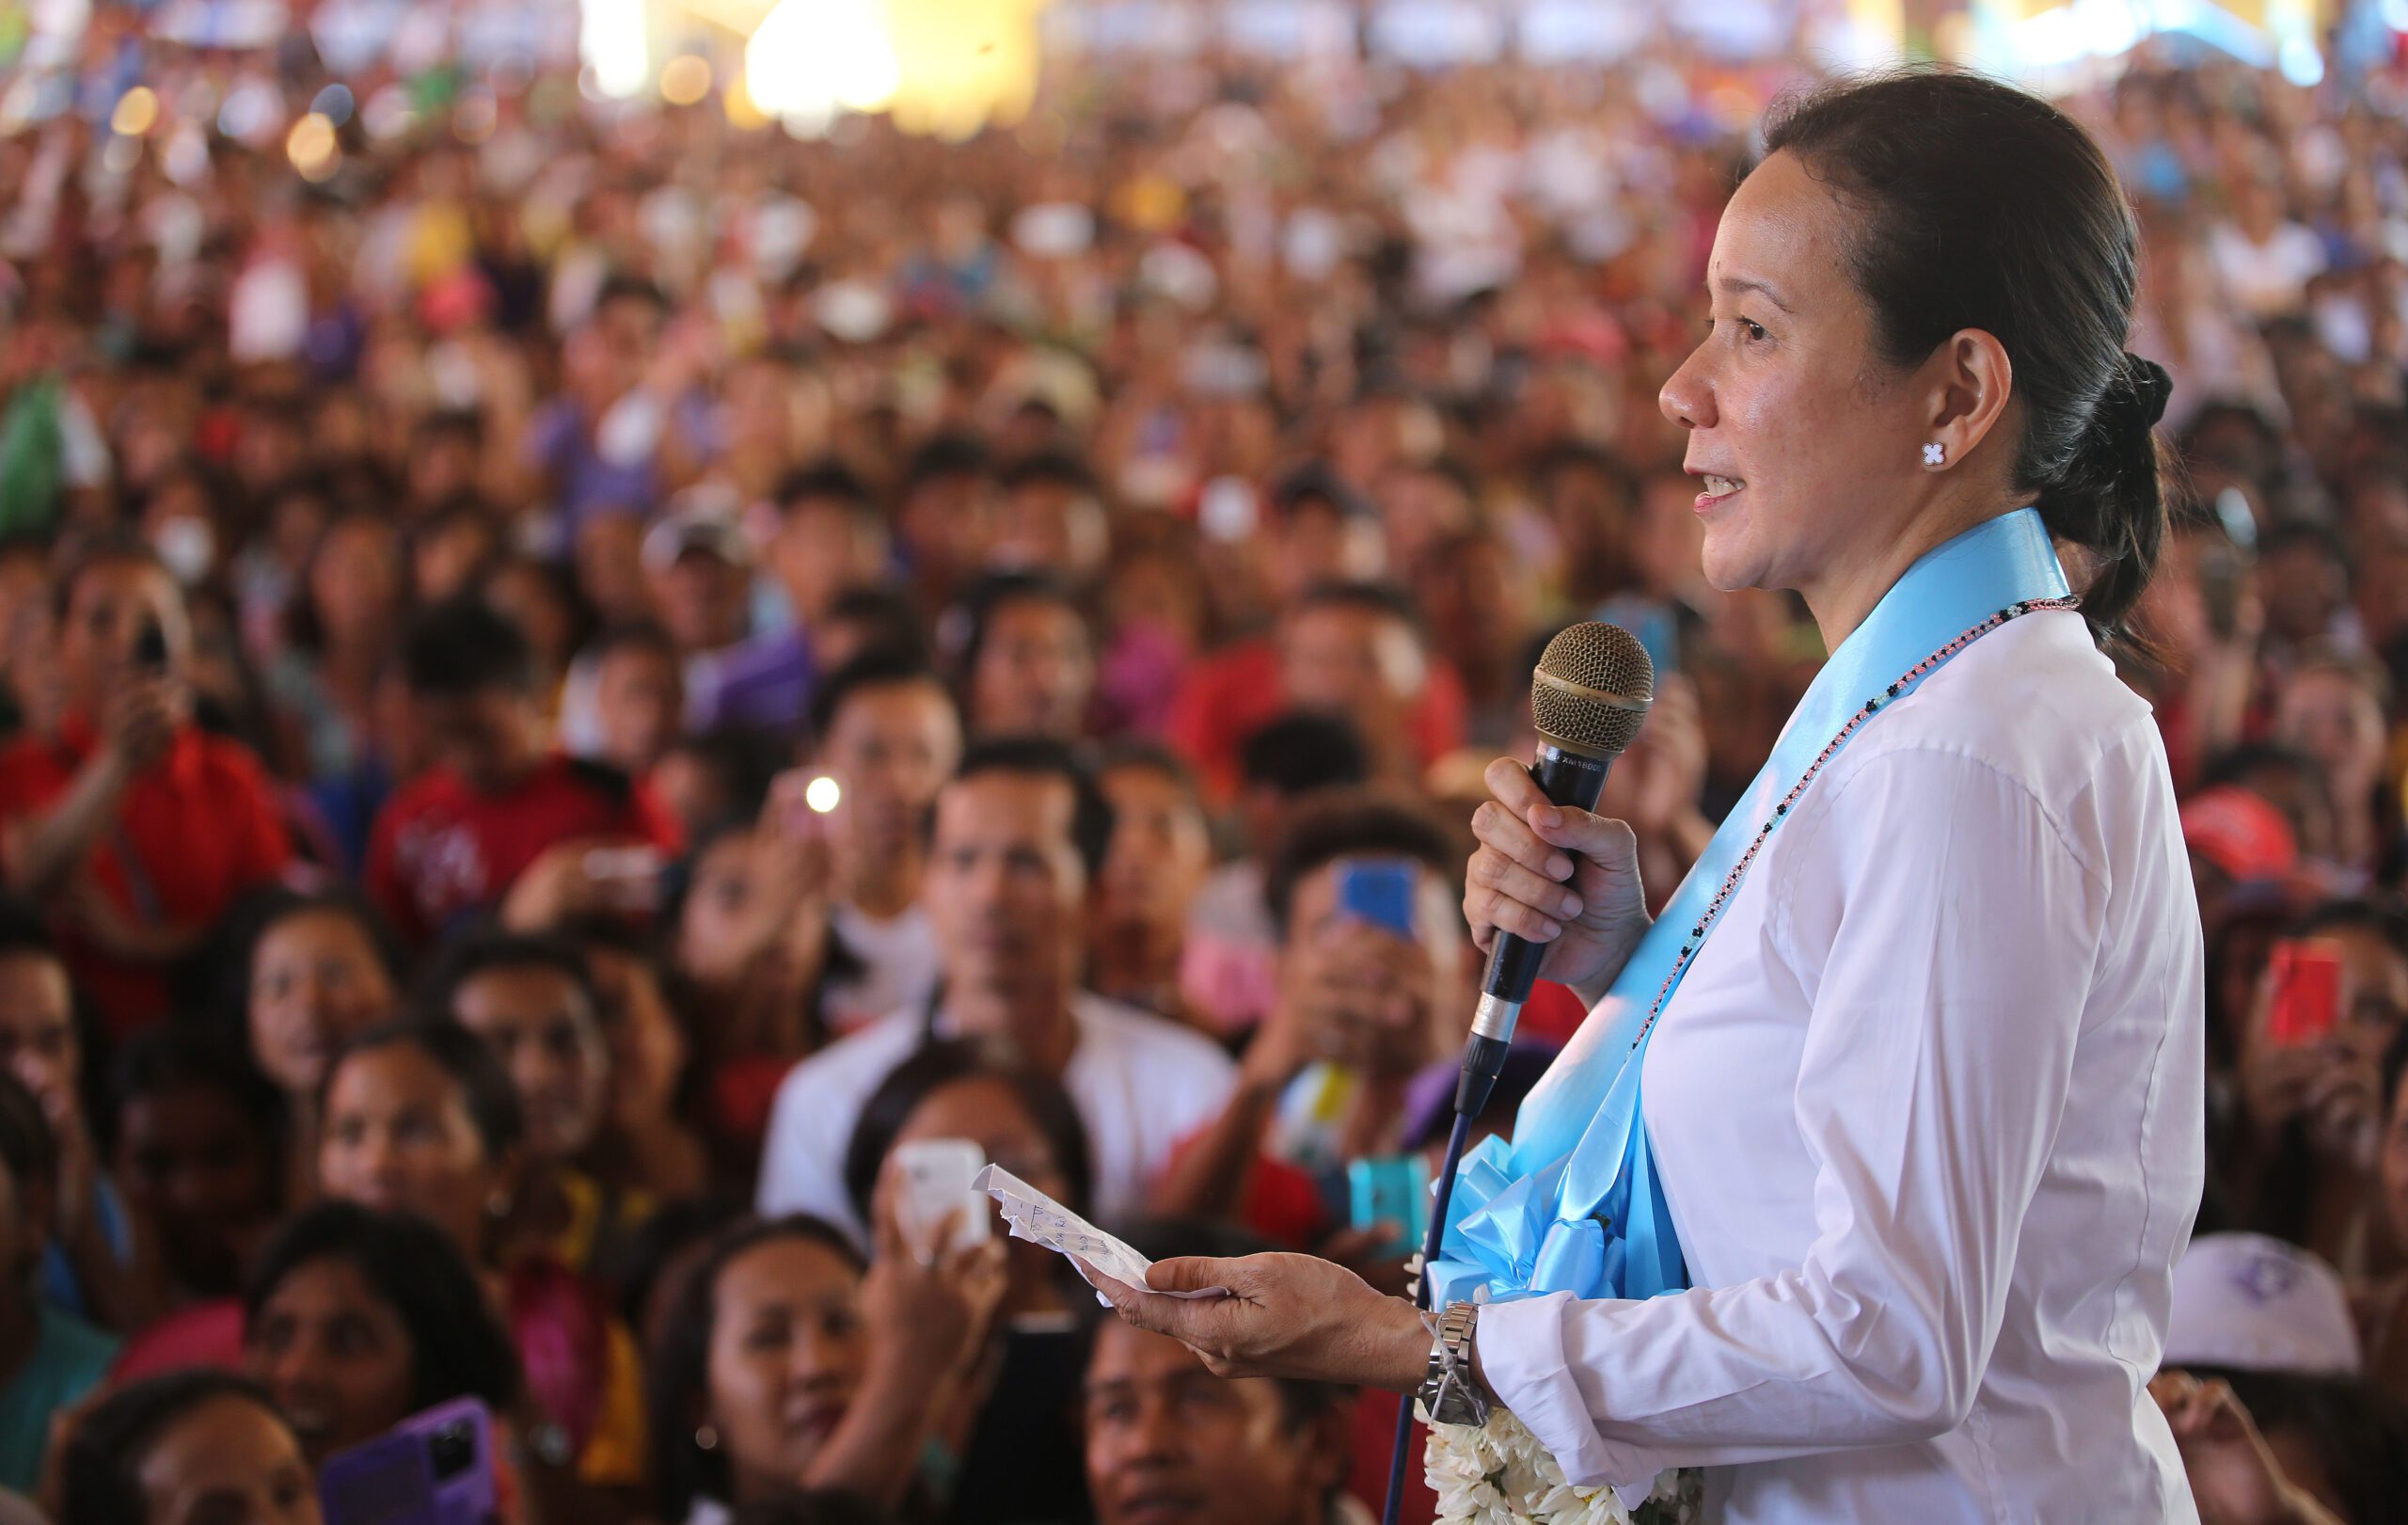 Poe now ‘open’ to more amendments to Constitution